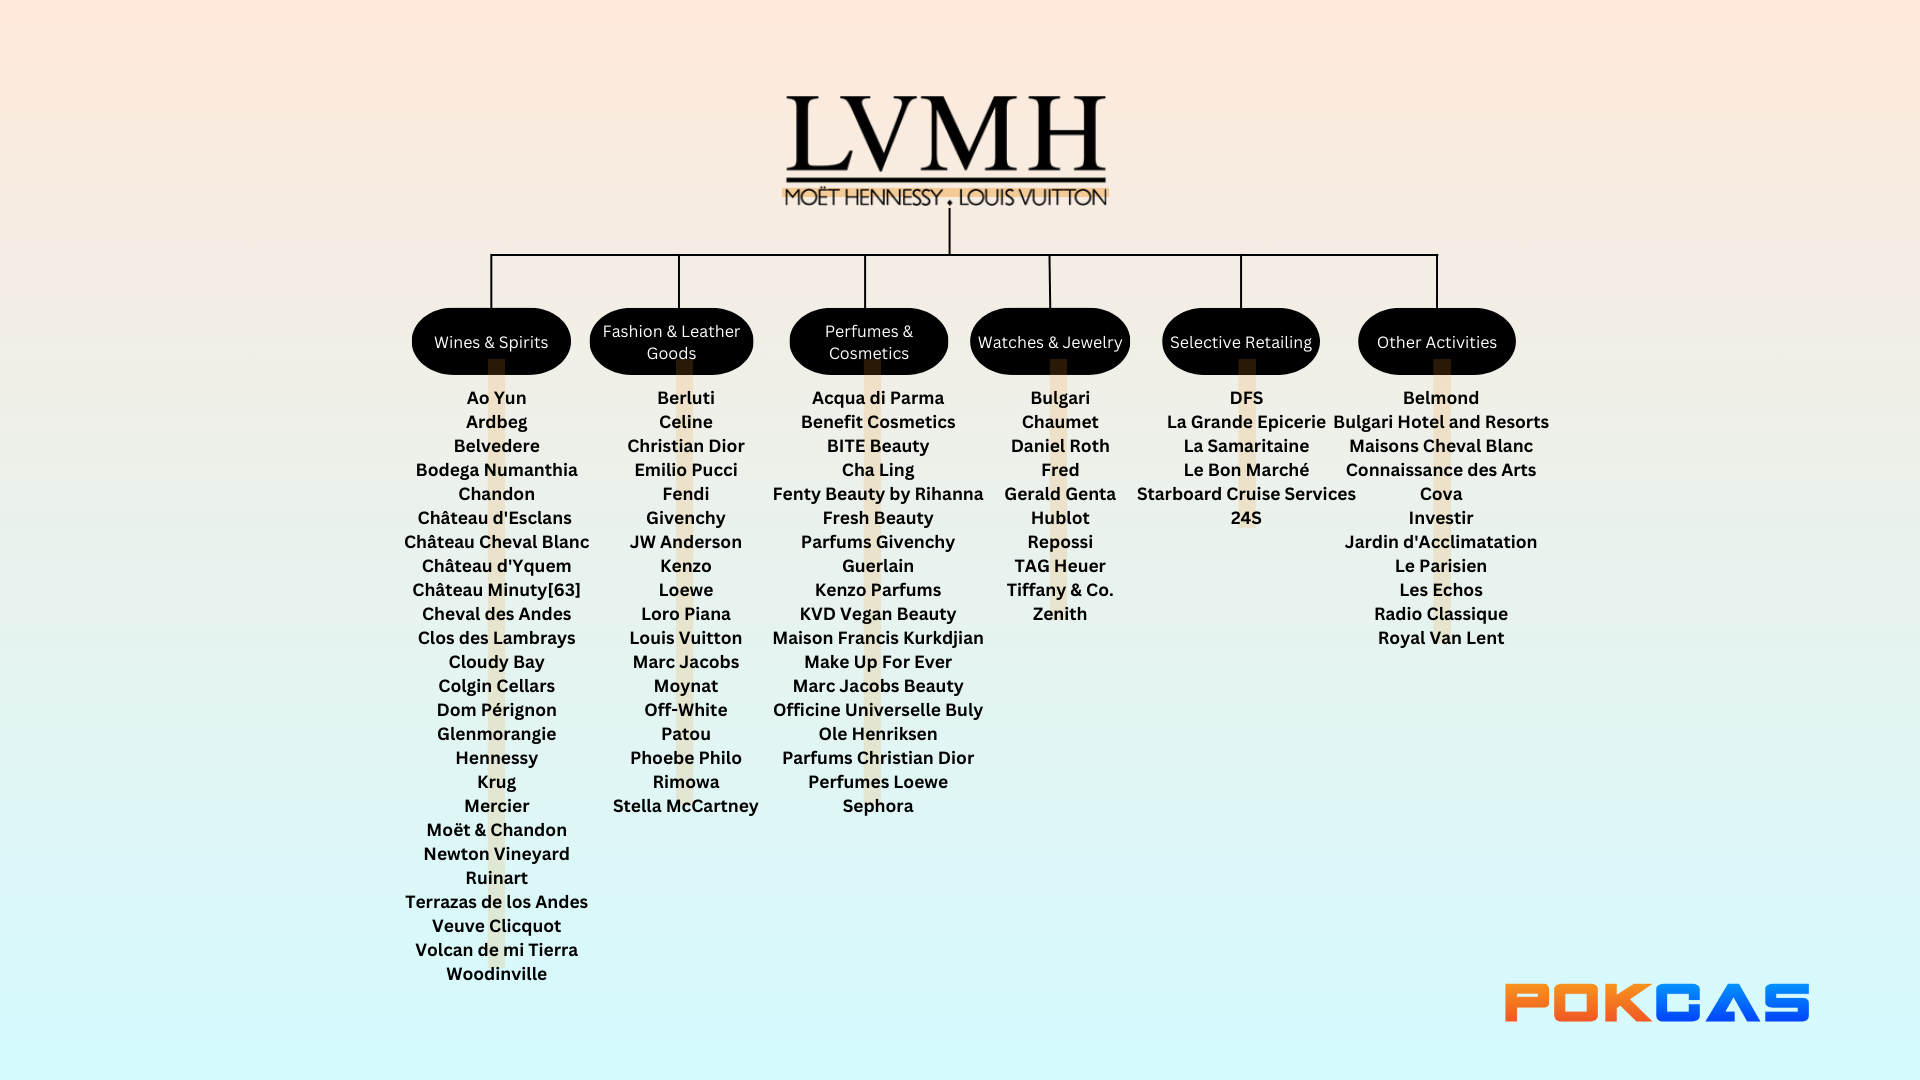 A chart of all the best-known companies owned by the LVMH group under the leadership of Bernard Arnault